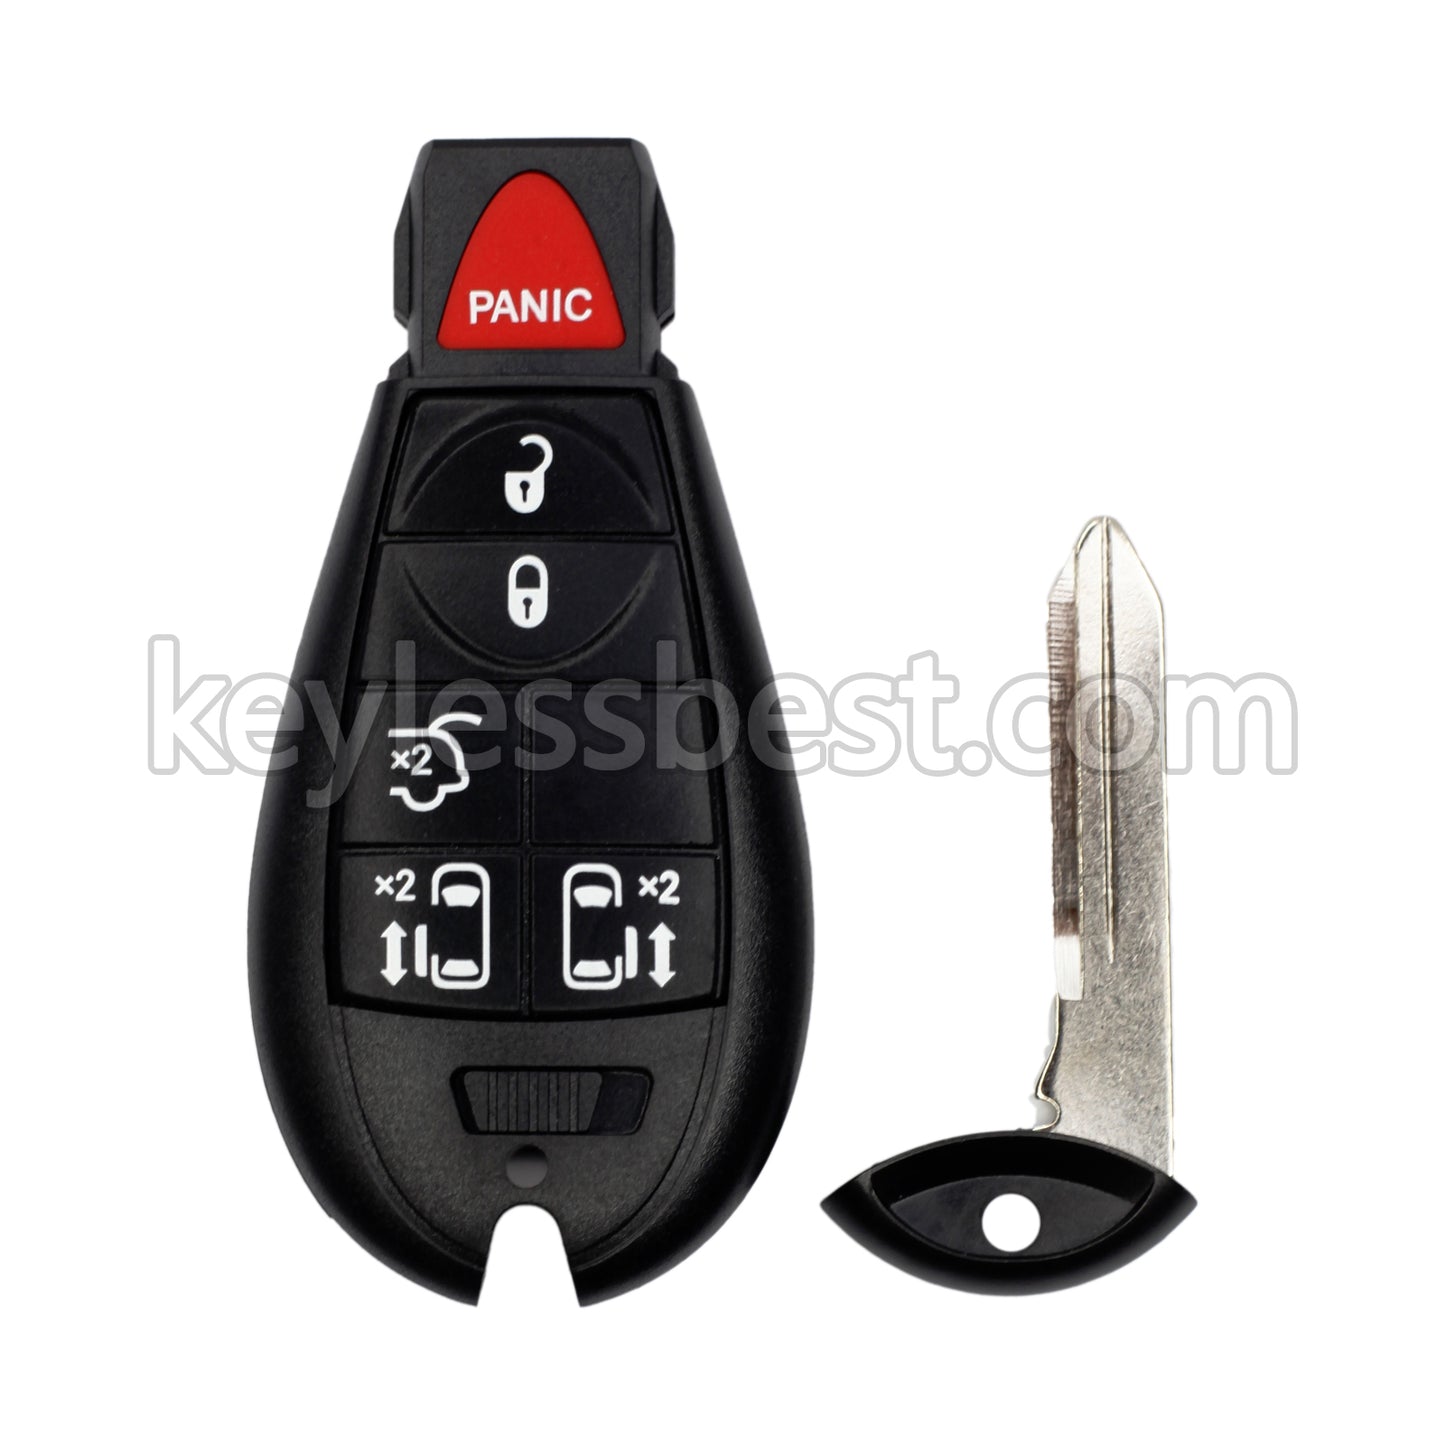 2006-2018 Chrysler Dodge Volkswagen Routan Jeep / 6 Buttons Remote Key / M3N5WY783X / 433MHz